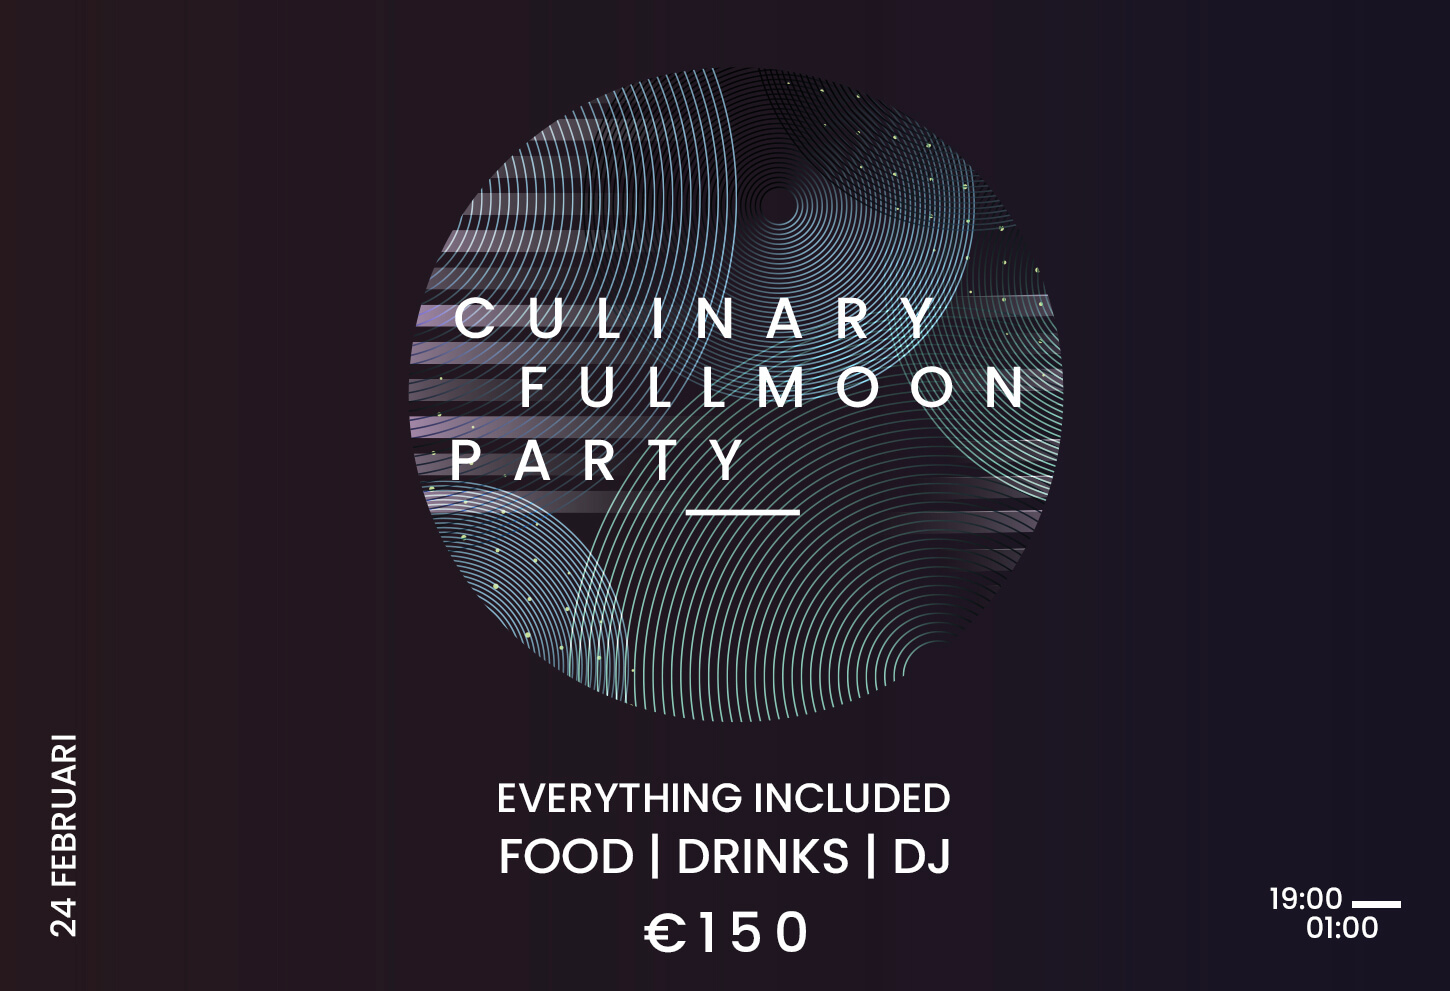 Culinary Fullmoon Party